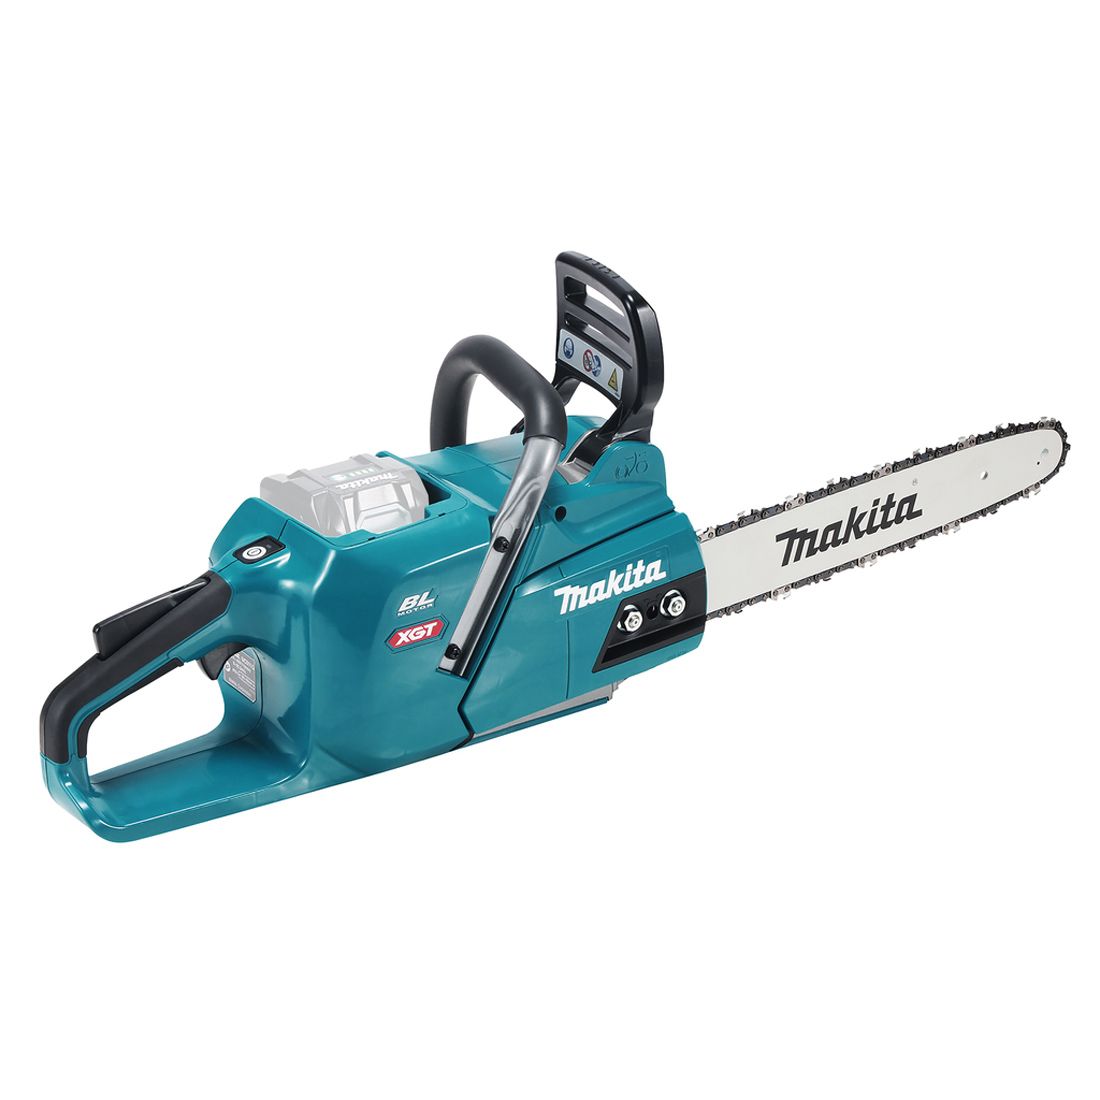 Makita 40v Max XGT 230mm Brushless 350mm 14" Chainsaw - UC011GZ - Body Only